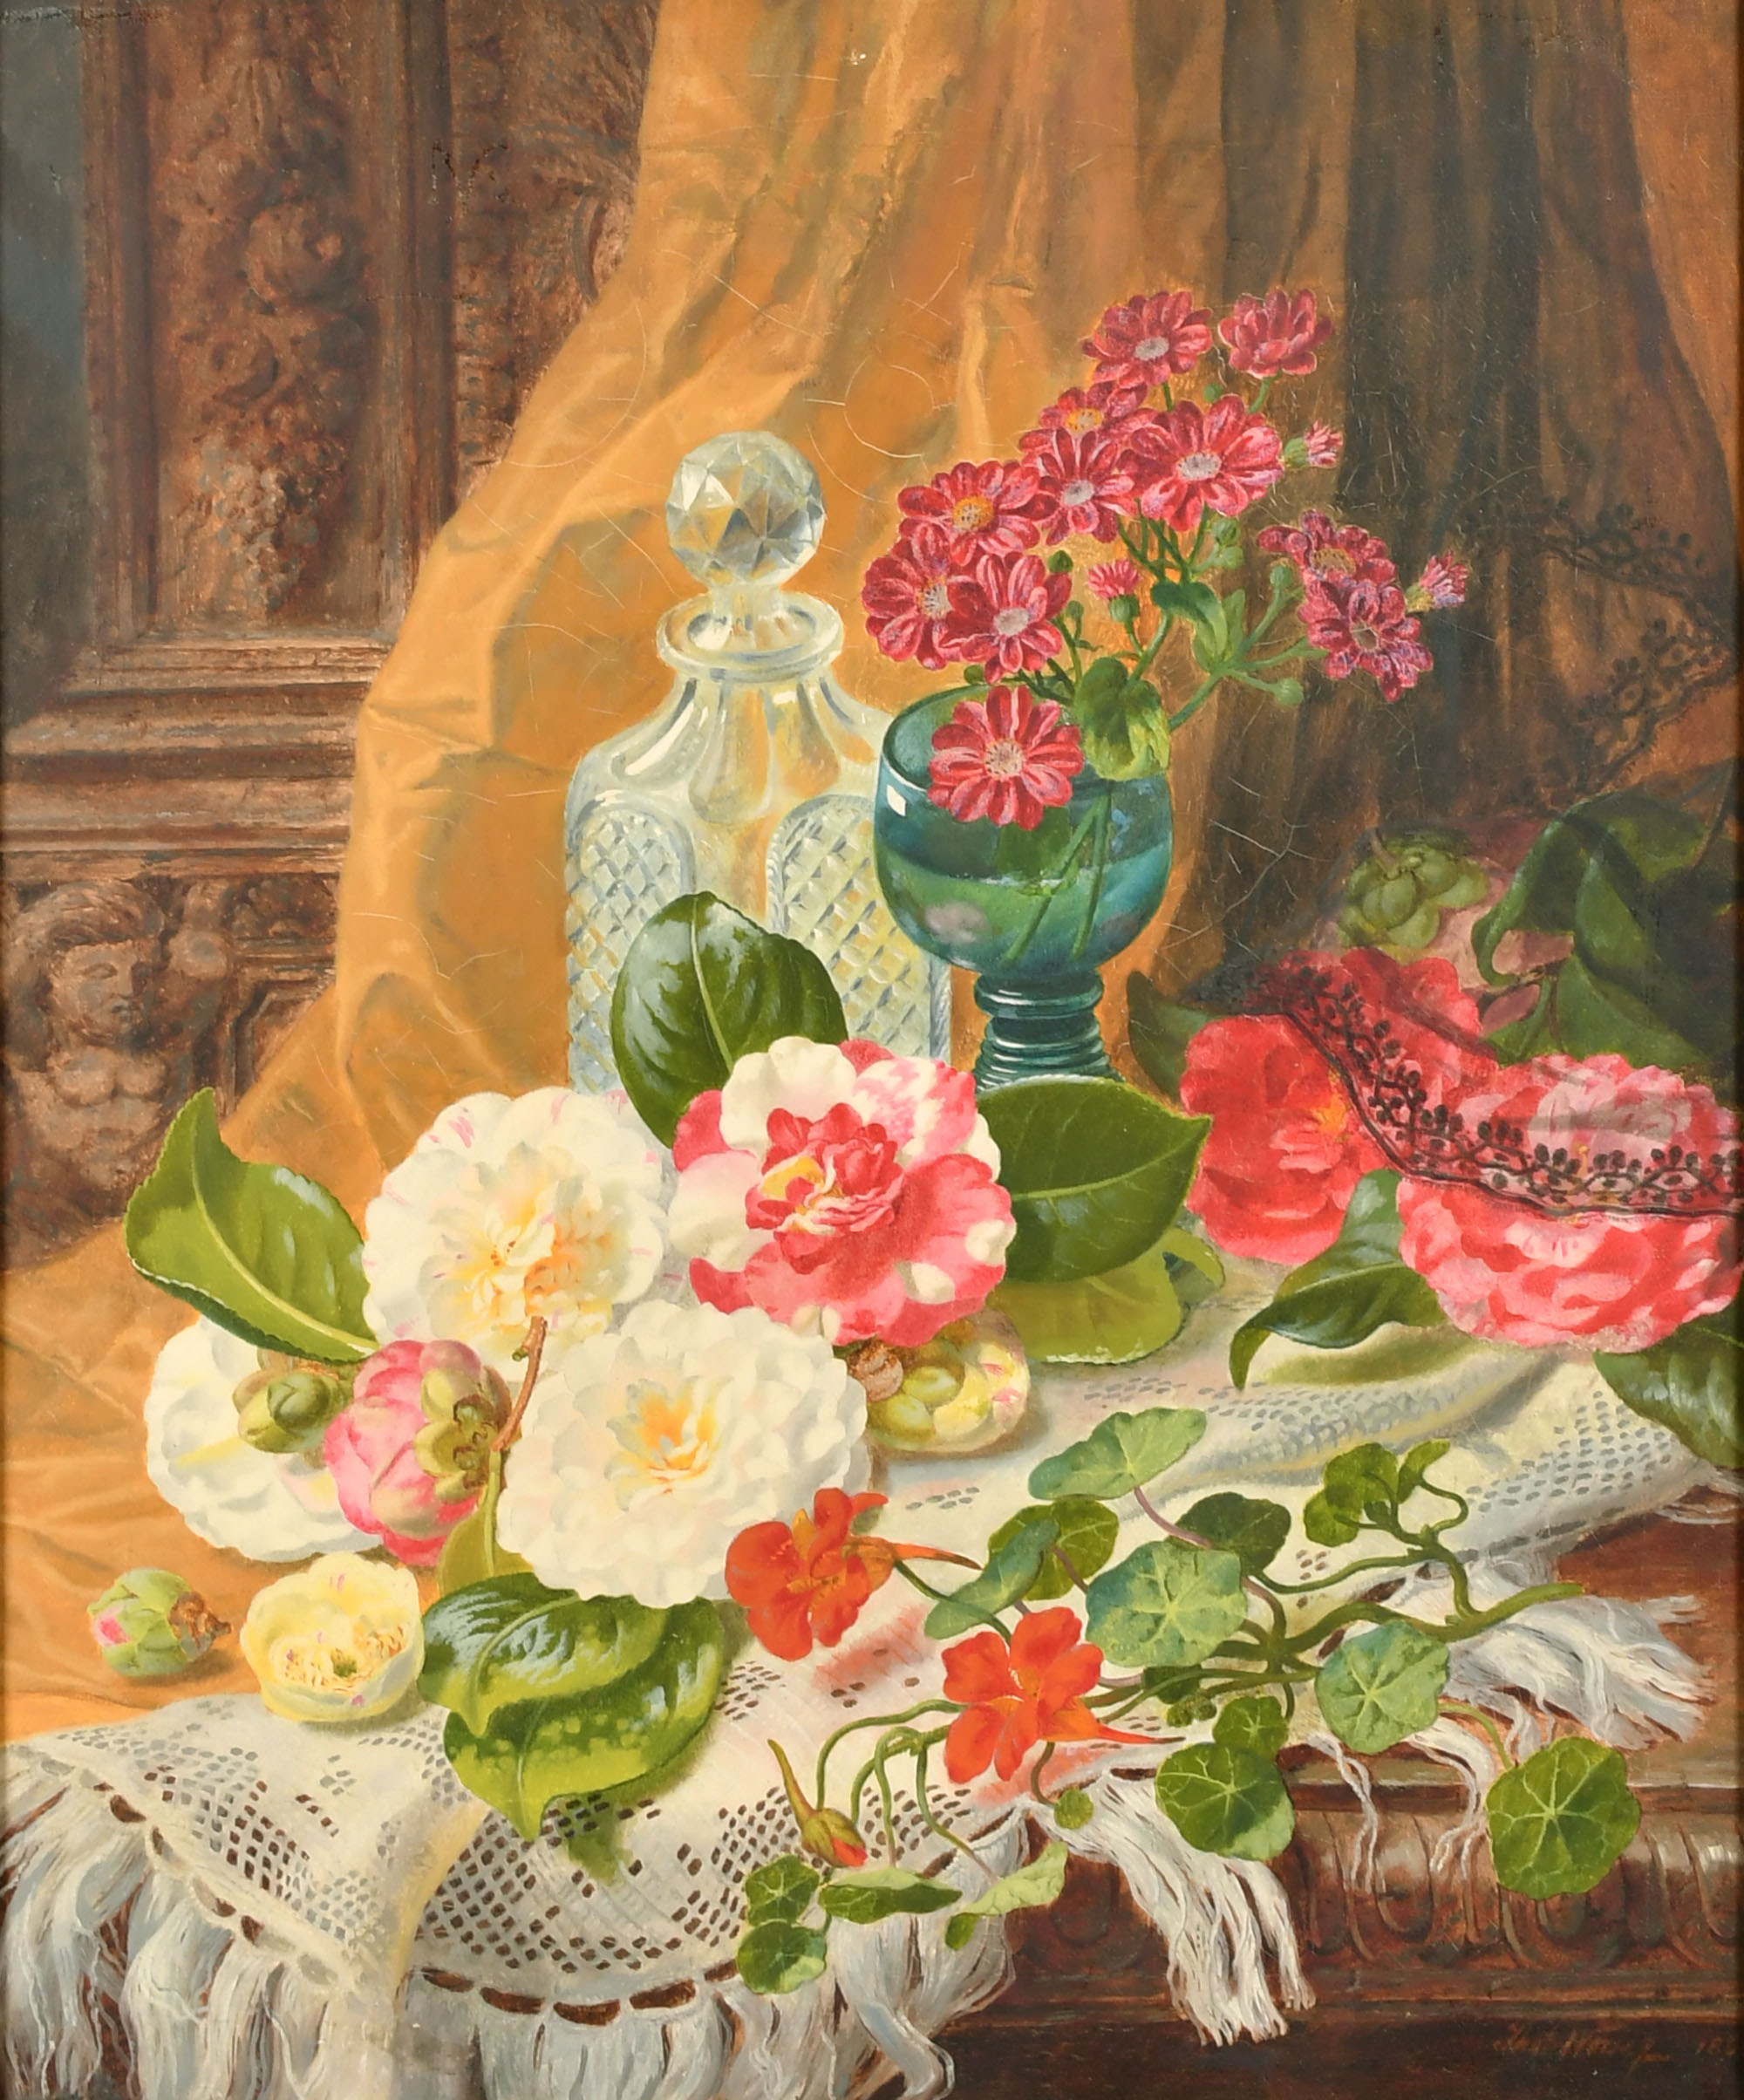 Thomas Worsey (1829-1875) British. Still Life with Flowers in a Glass, Oil on canvas, Signed and